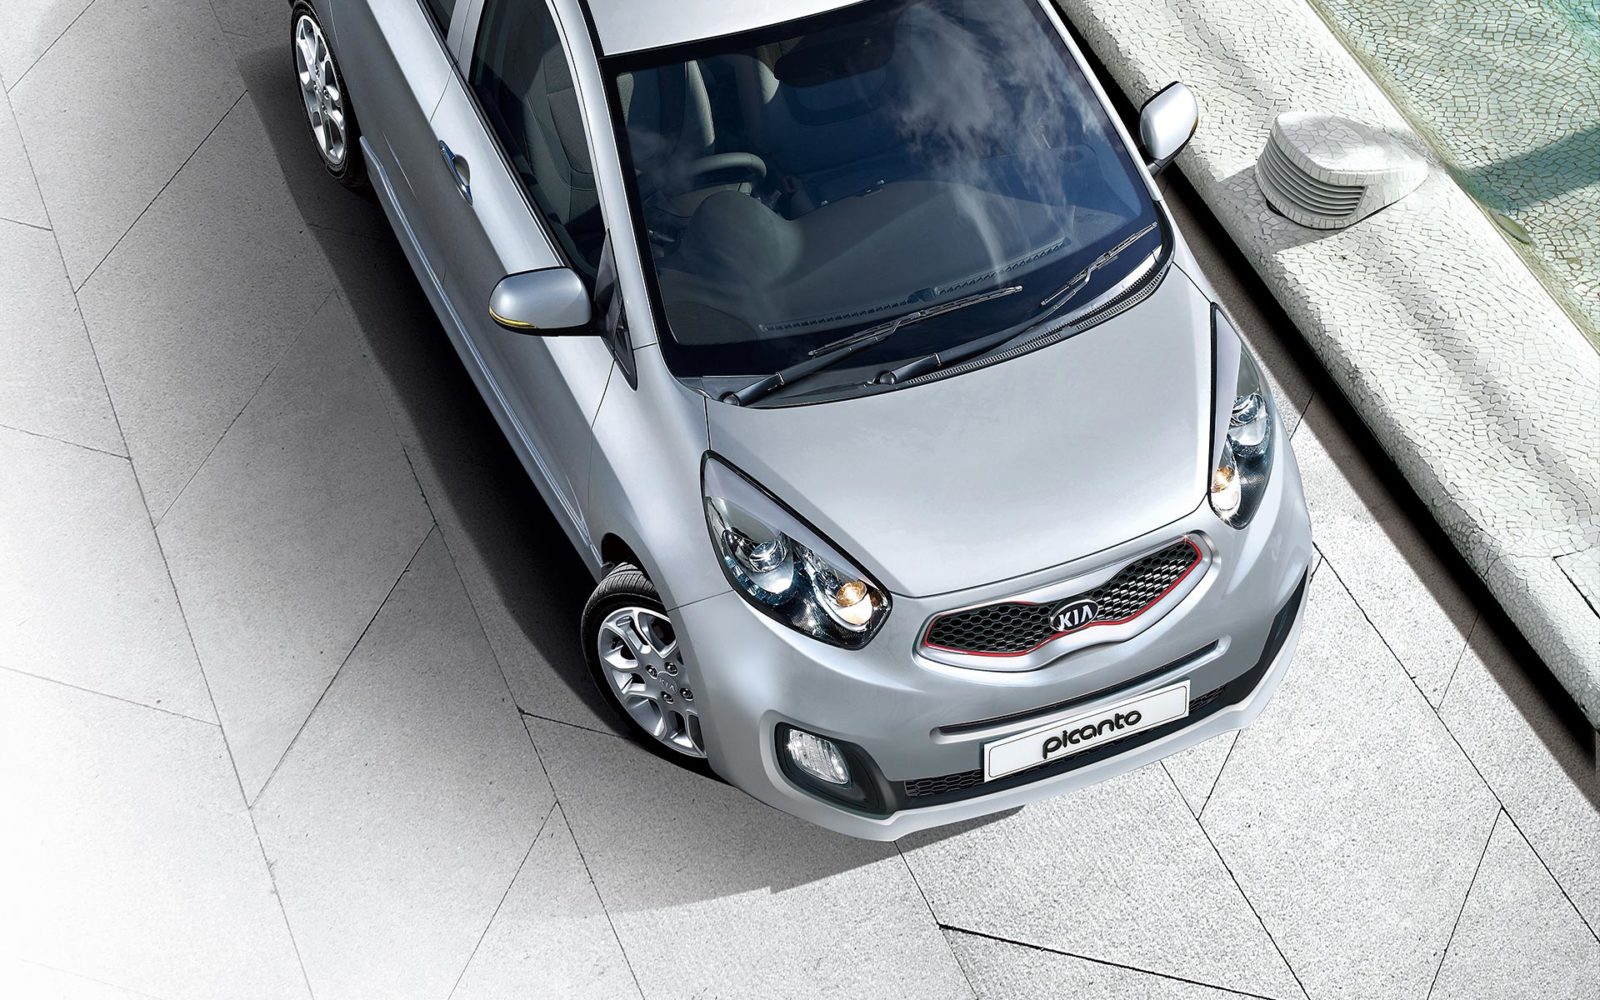 Kia Picanto Hatchback Spotted In Pakistan